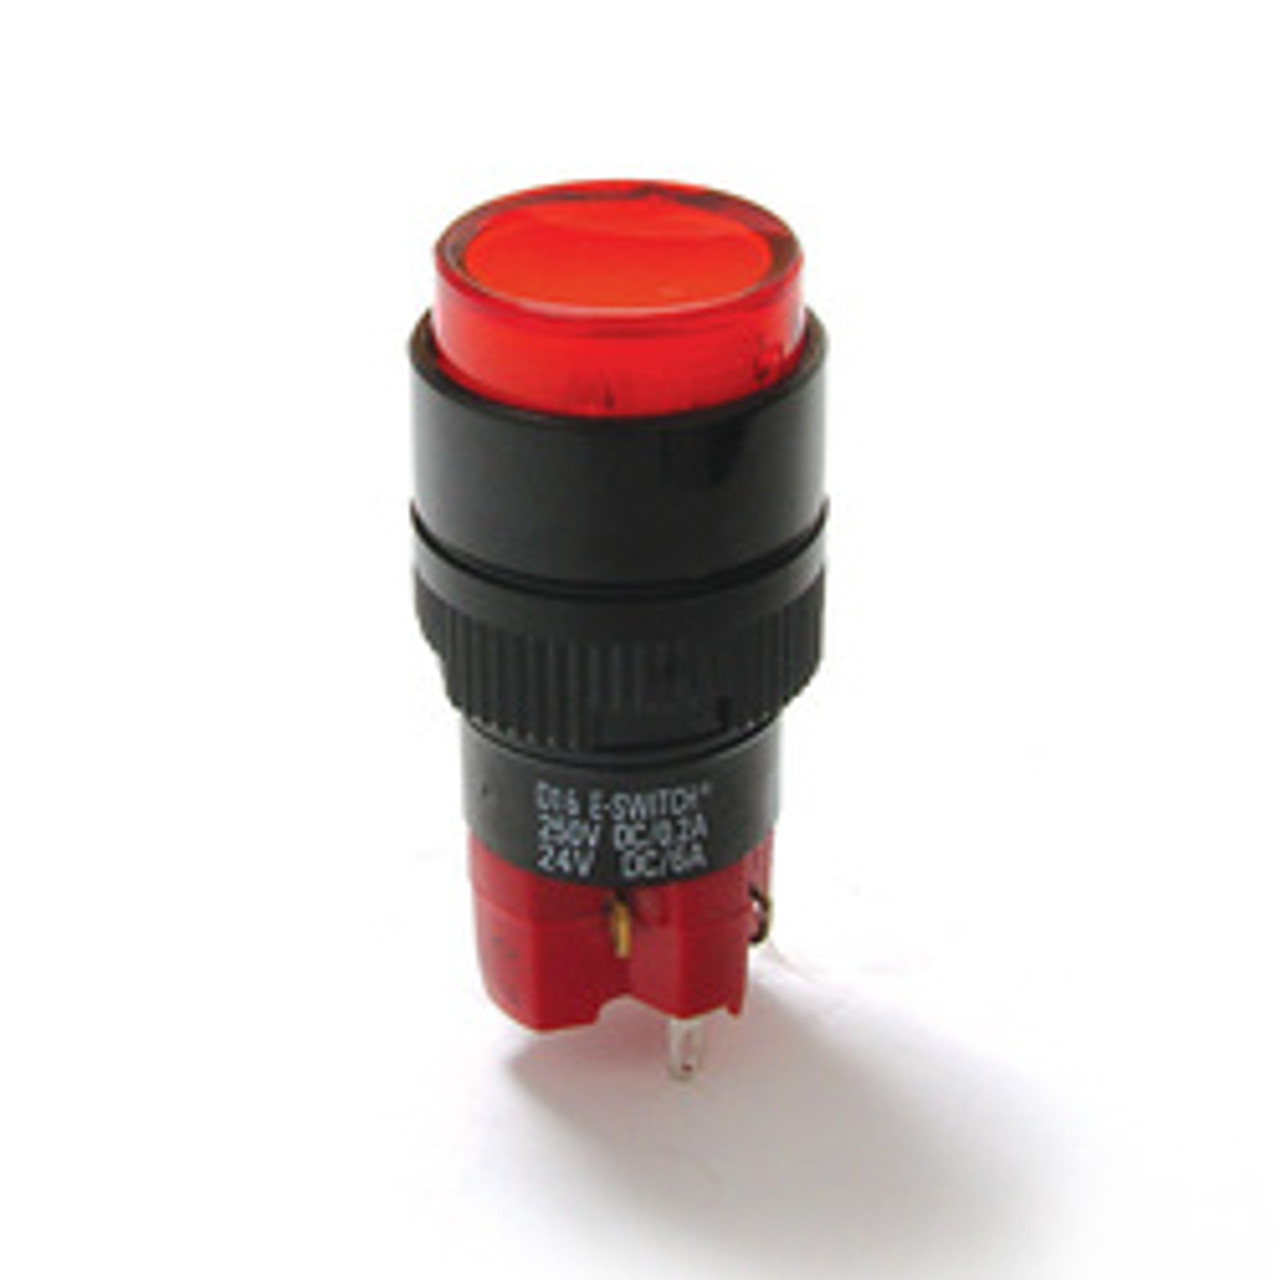 E-Switch D16OAS11DYELOPCONCAVE Pushbutton Switches